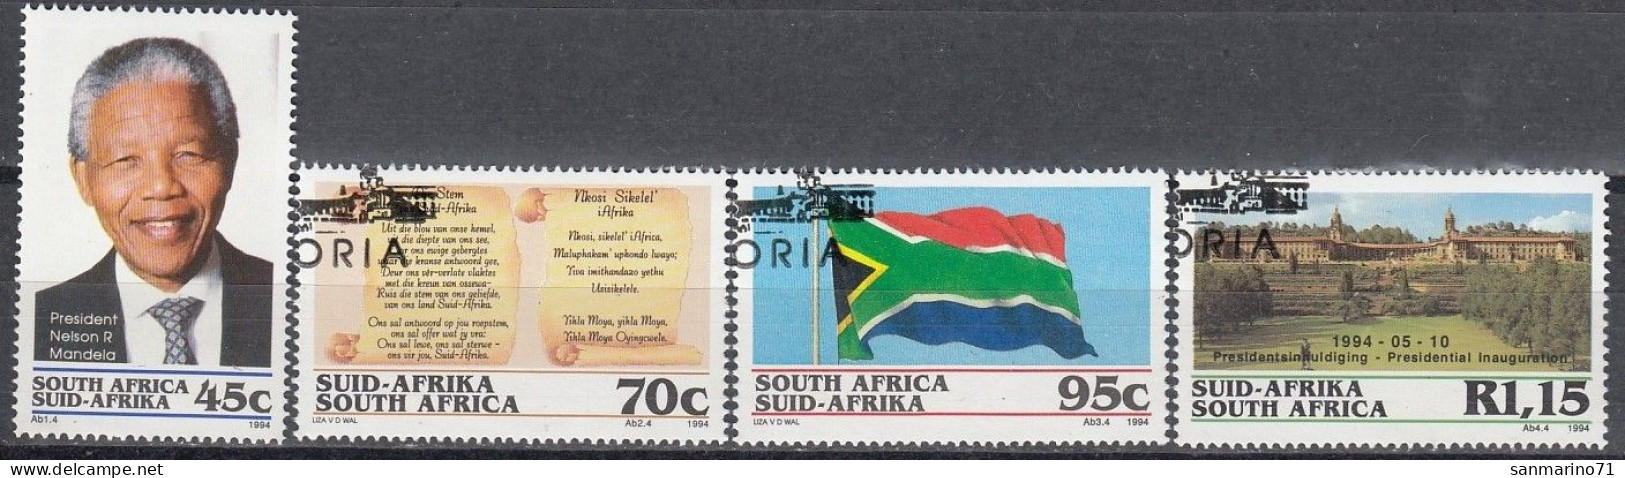 SOUTH AFRICA 926-929,used - Usati